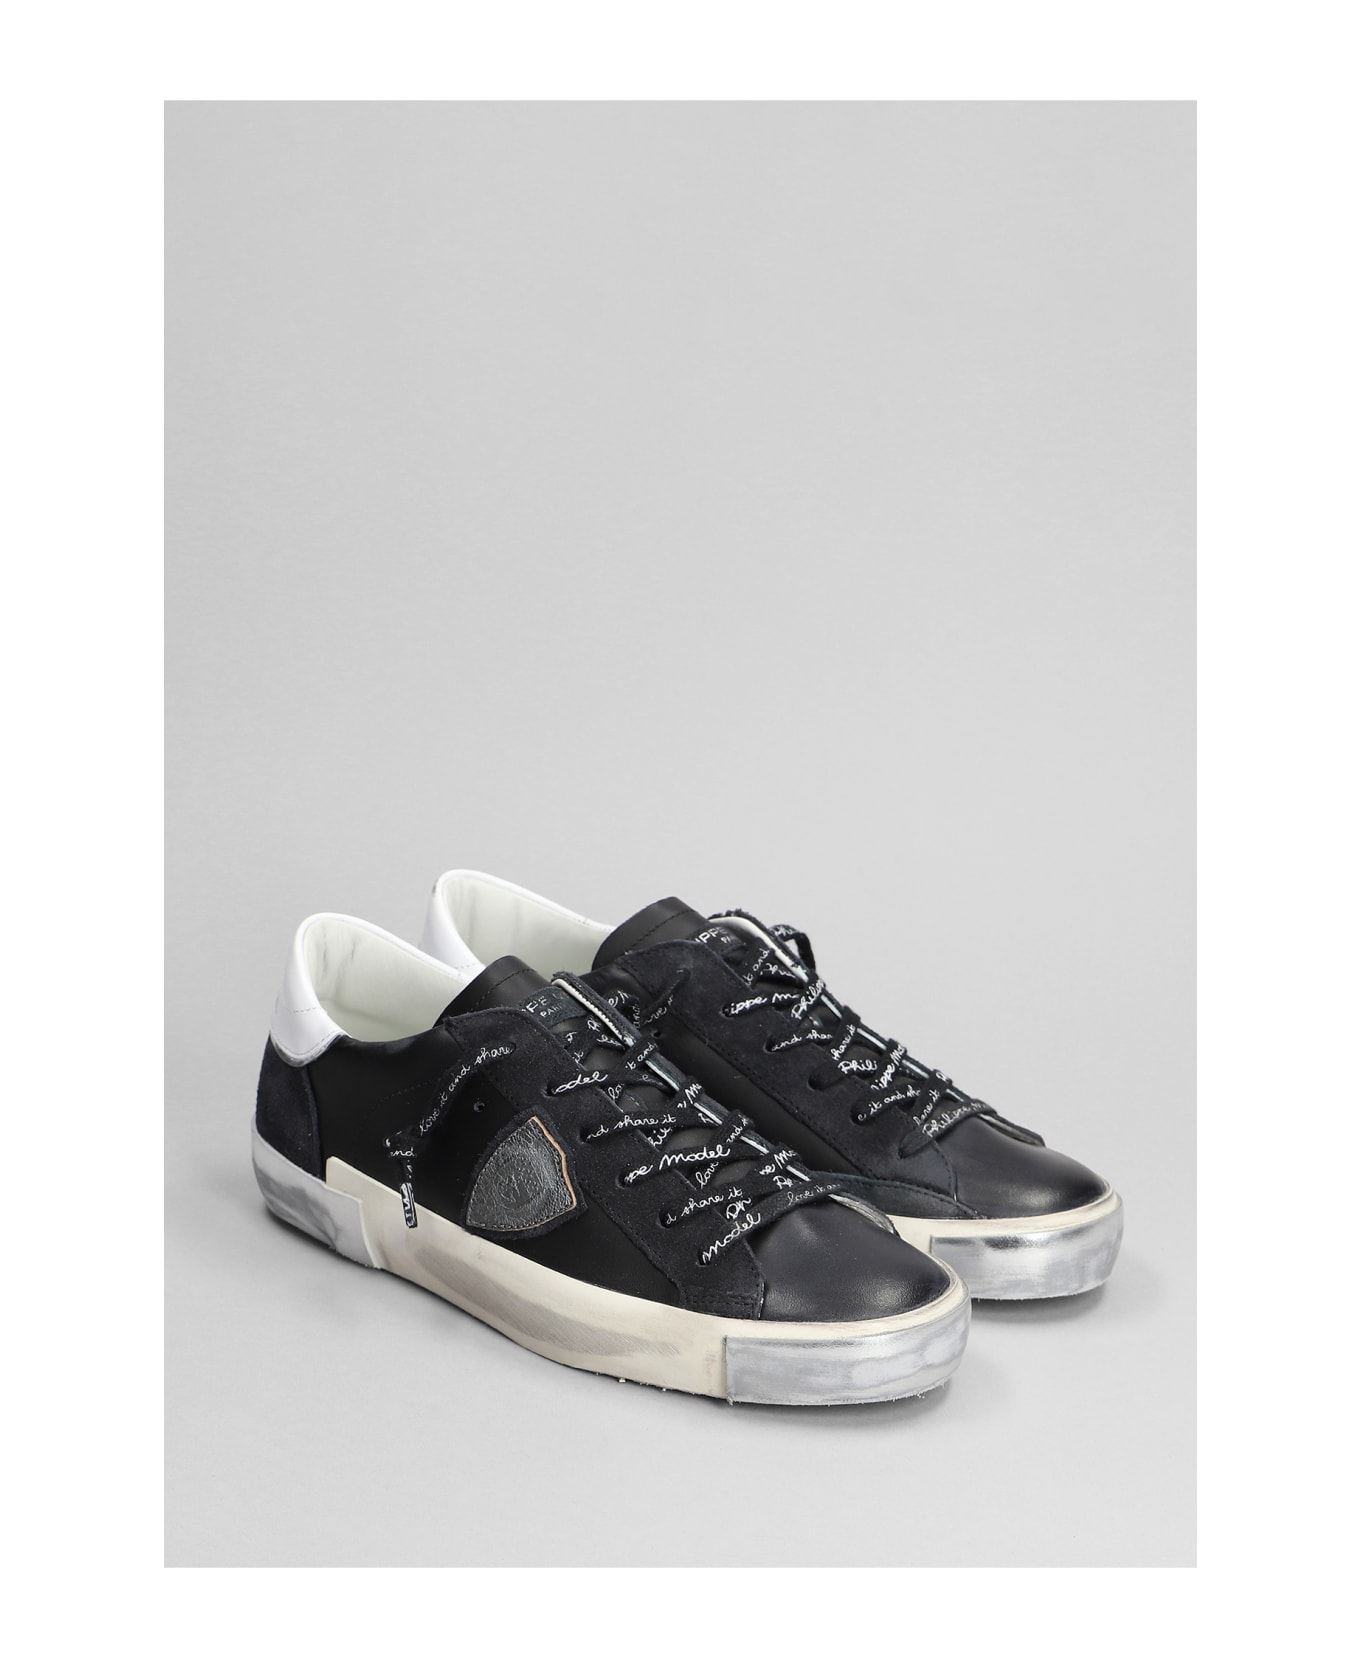 Philippe Model Prsx Low Sneakers In Black Suede And Leather - black スニーカー